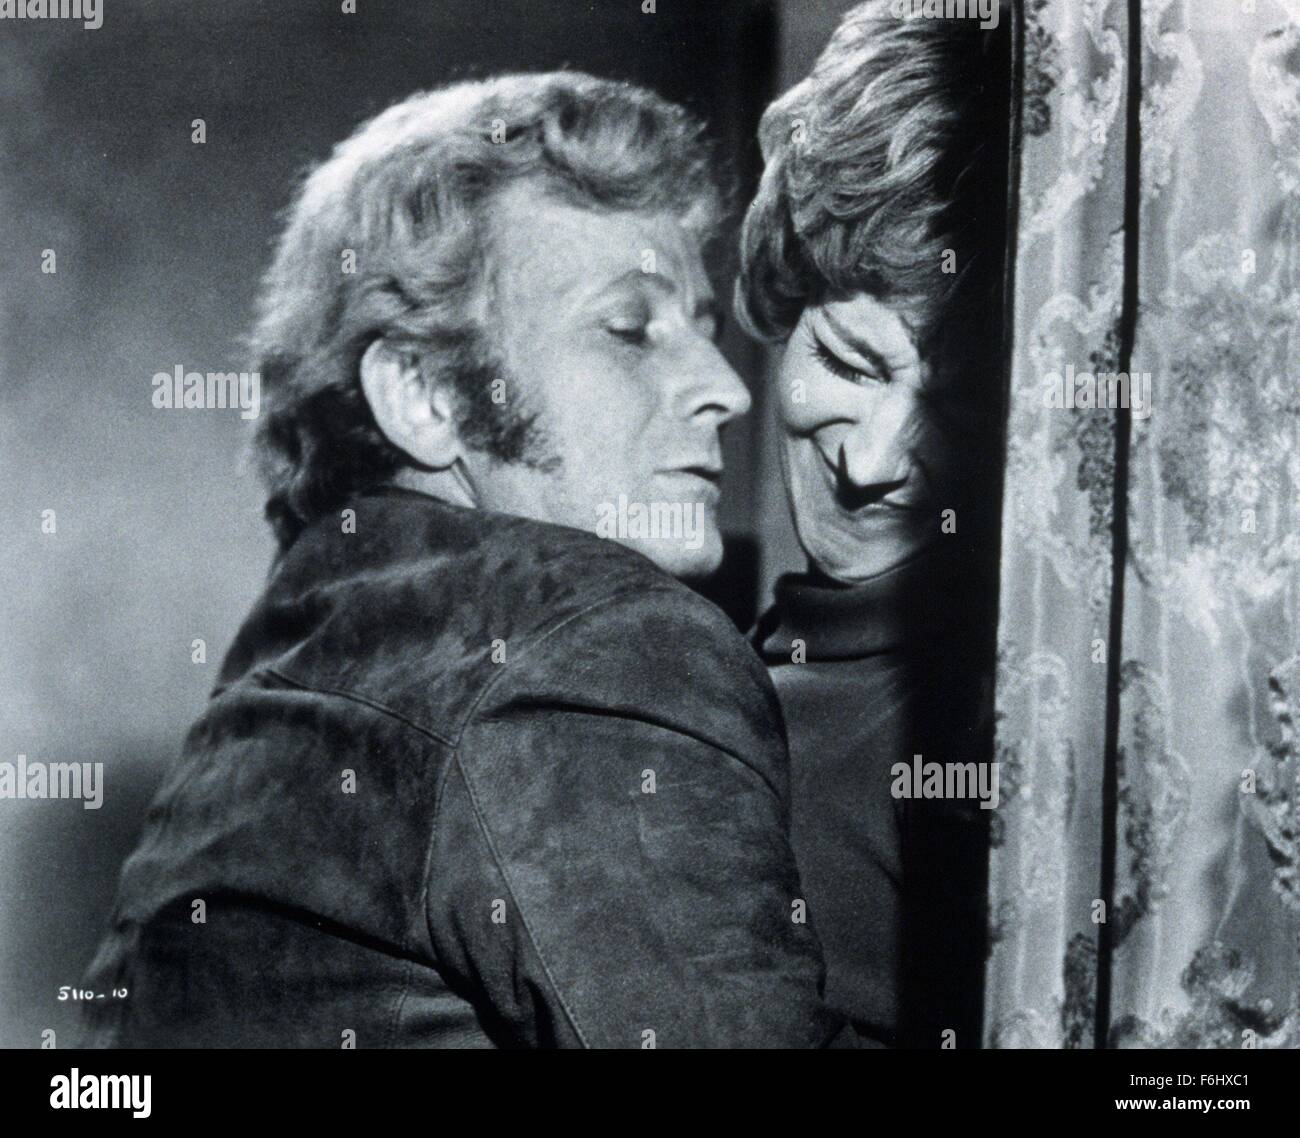 1972, Film Title: FRENZY, Director: ALFRED HITCHCOCK, Studio: UNIVERSAL, Pictured: BARRY FOSTER, ALFRED HITCHCOCK. (Credit Image: SNAP) Stock Photo